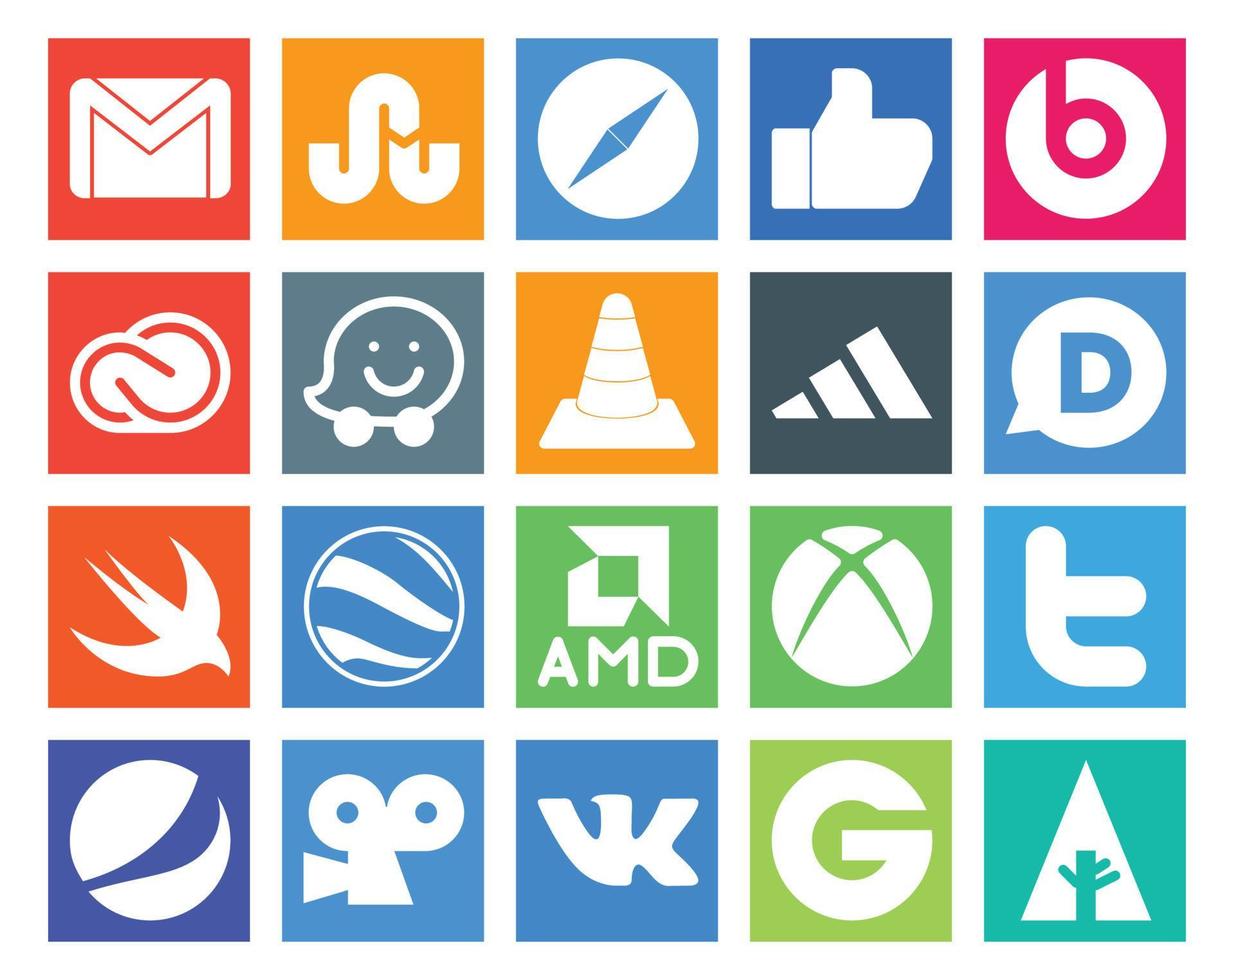 20 Social Media Icon Pack Including swift adidas creative cloud player vlc vector